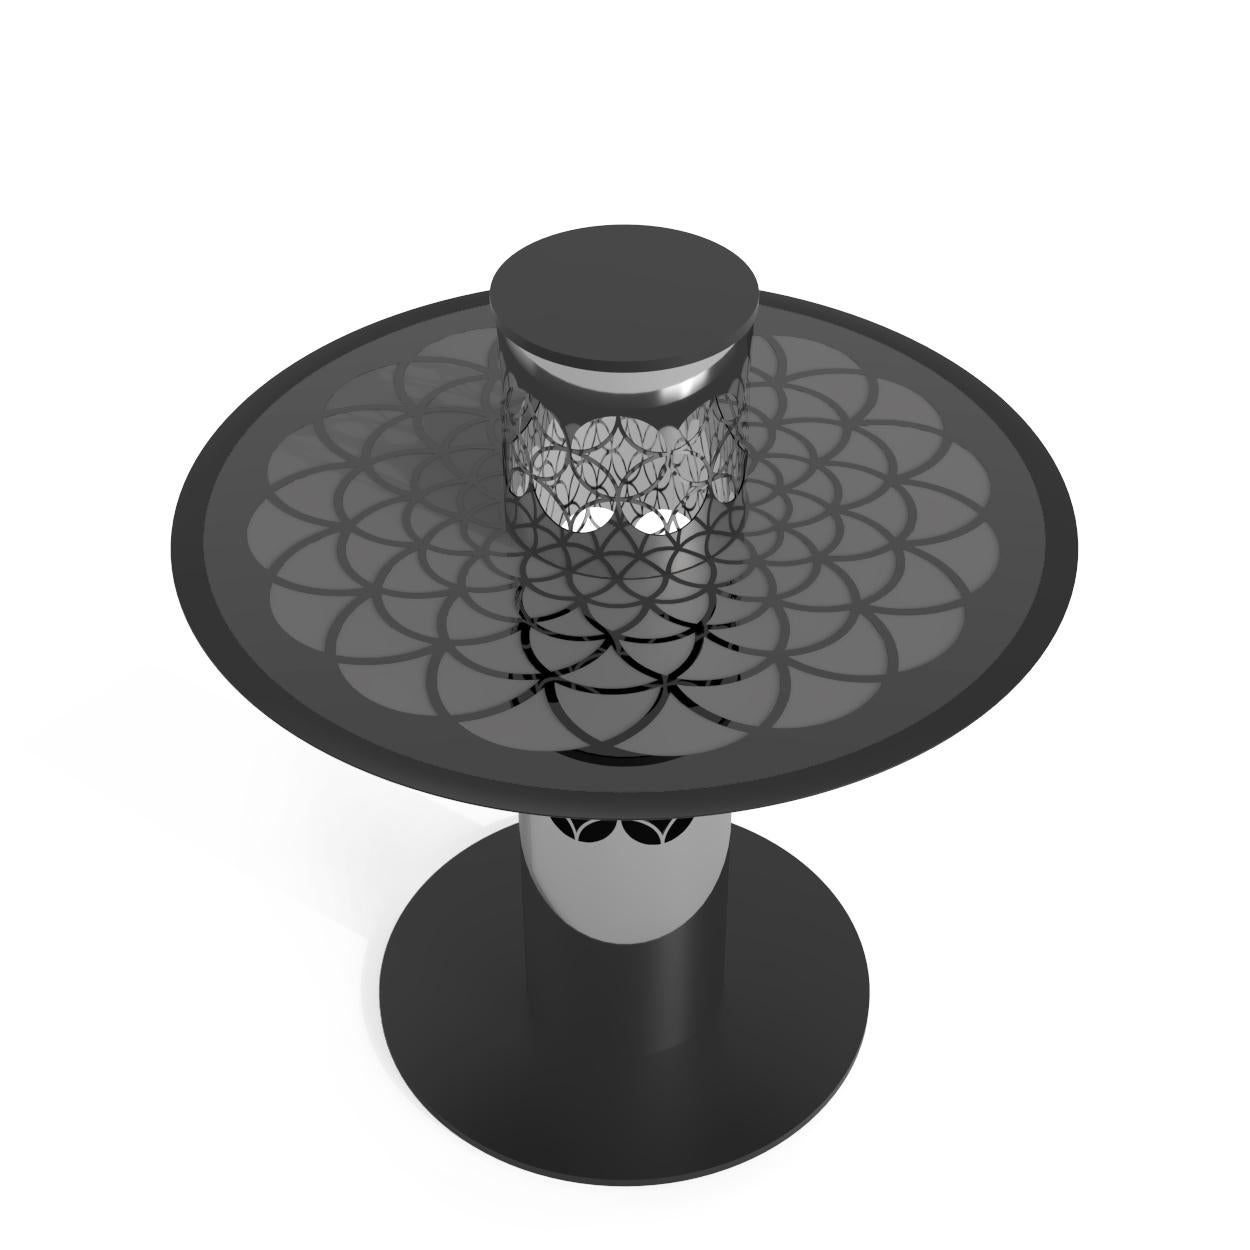 Modern Arabic-Inspired Center Tea Table Polished Stainless Steel and Black Glass For Sale 1